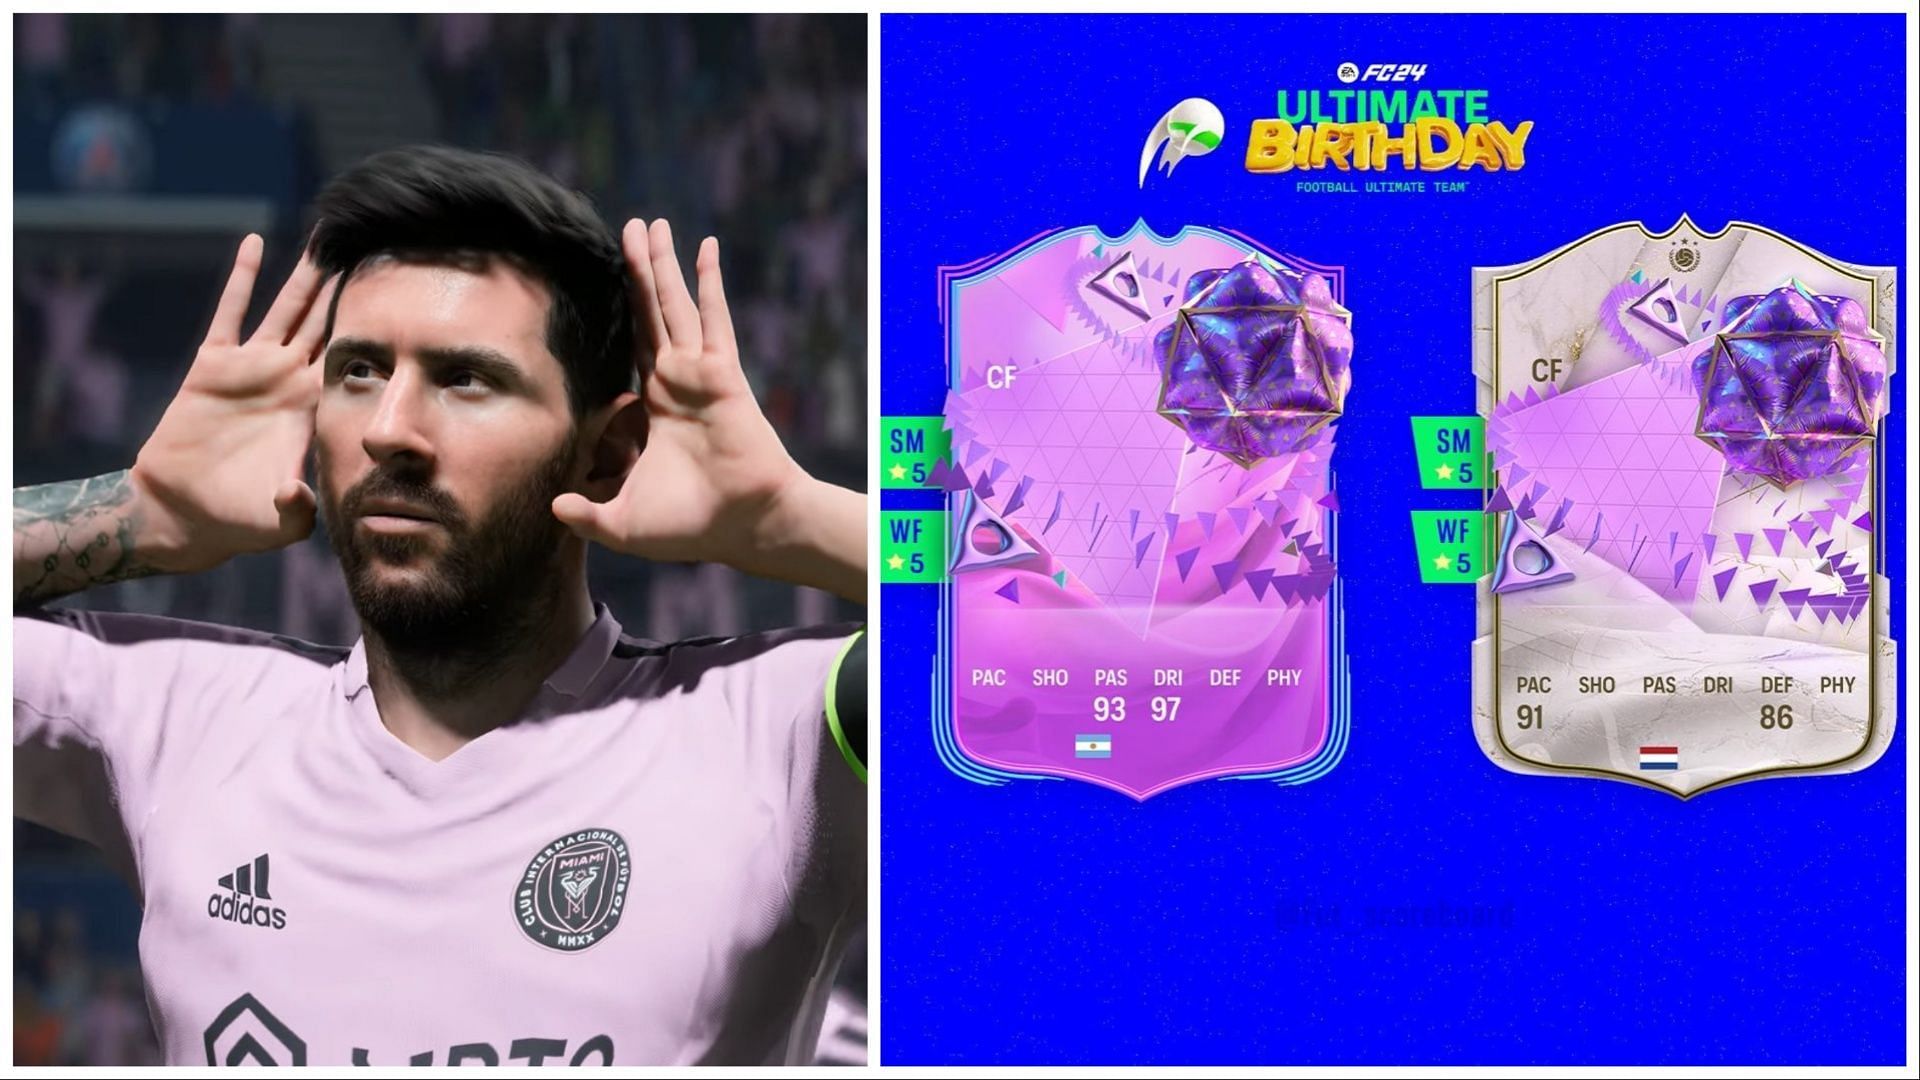 Messi and Gullit have been leaked as part of EA FC 24 Ultimate Birthday